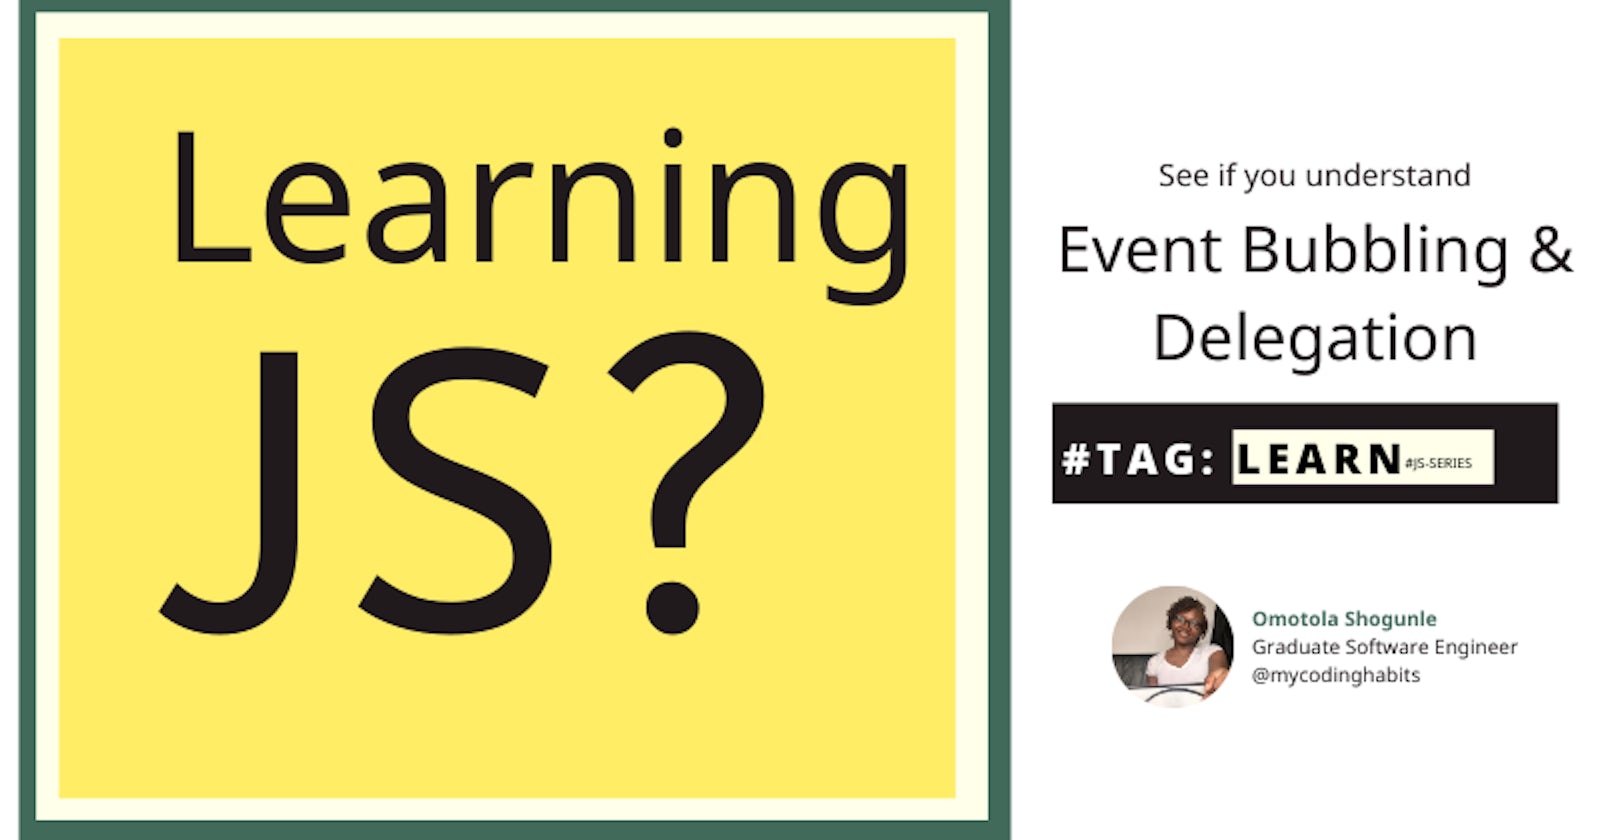 Learning JavaScript? Topic - Event Bubbling and Delegation